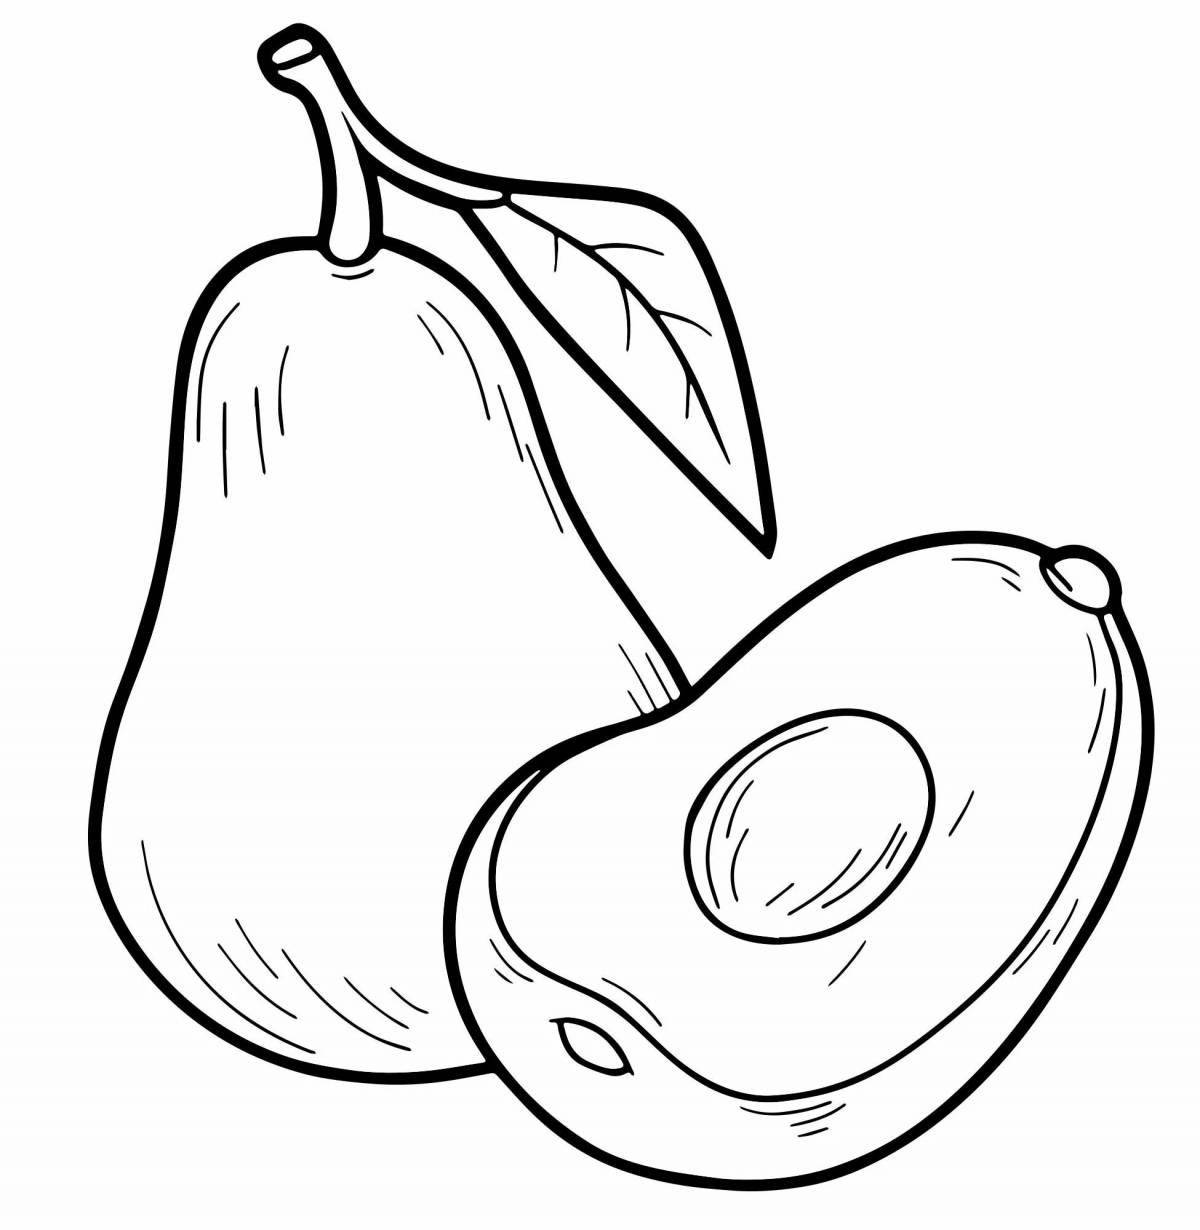 Animated avocado coloring page